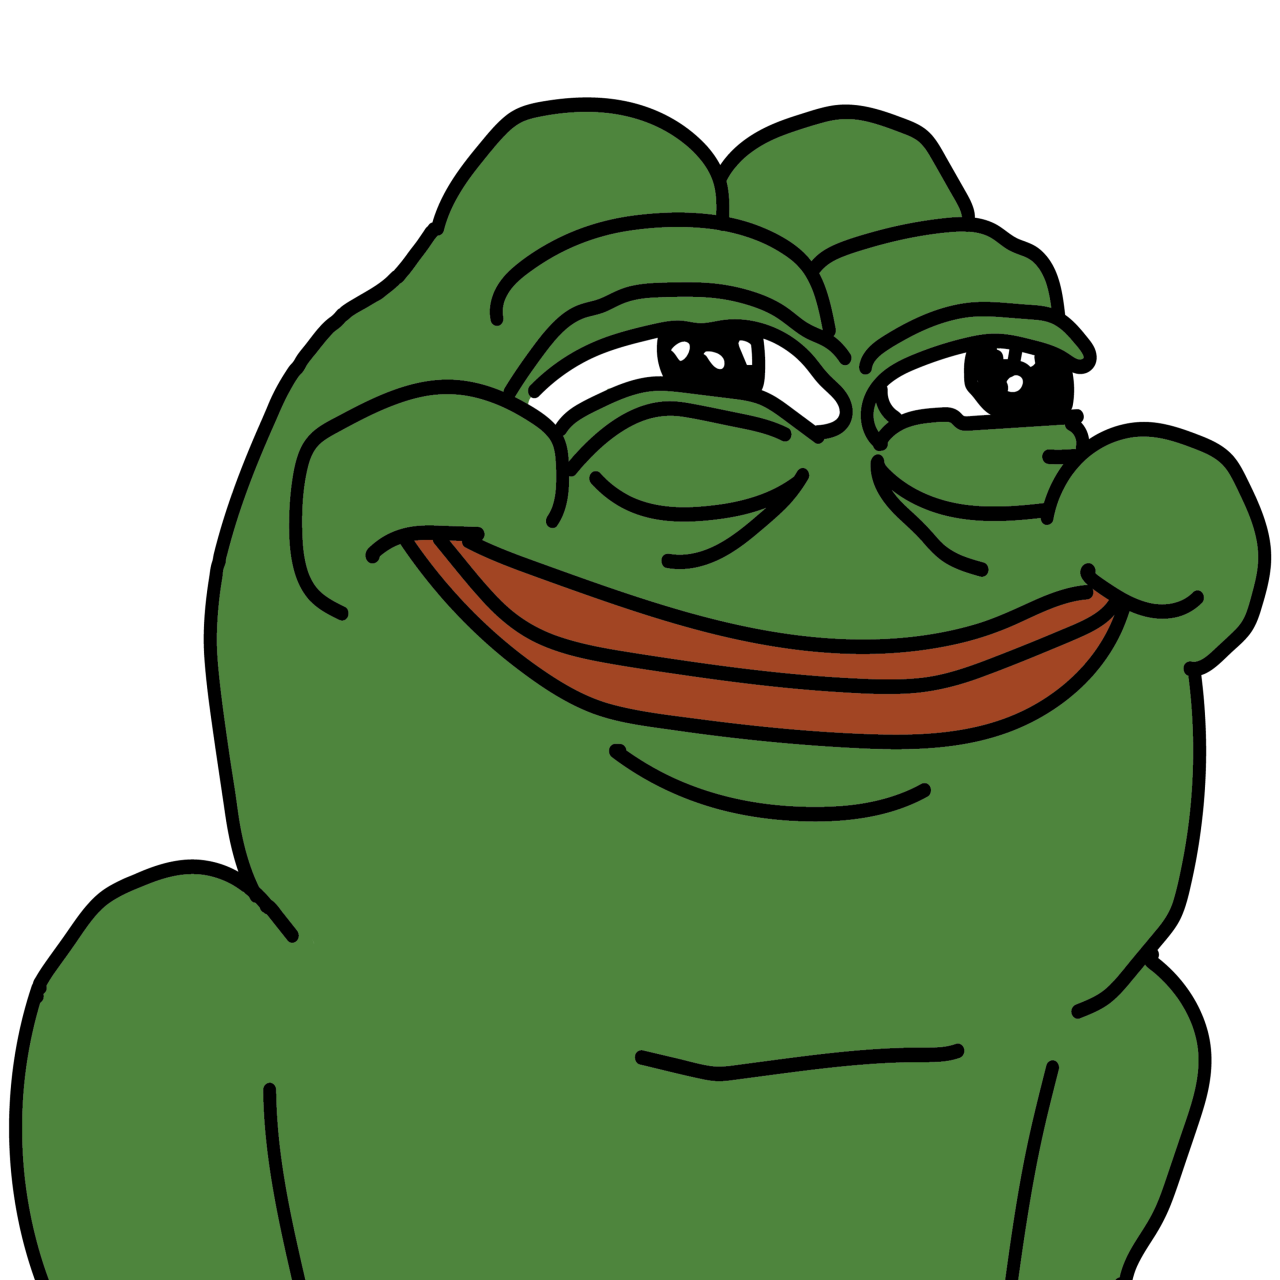 An Open Commentary About Pepe the Frog